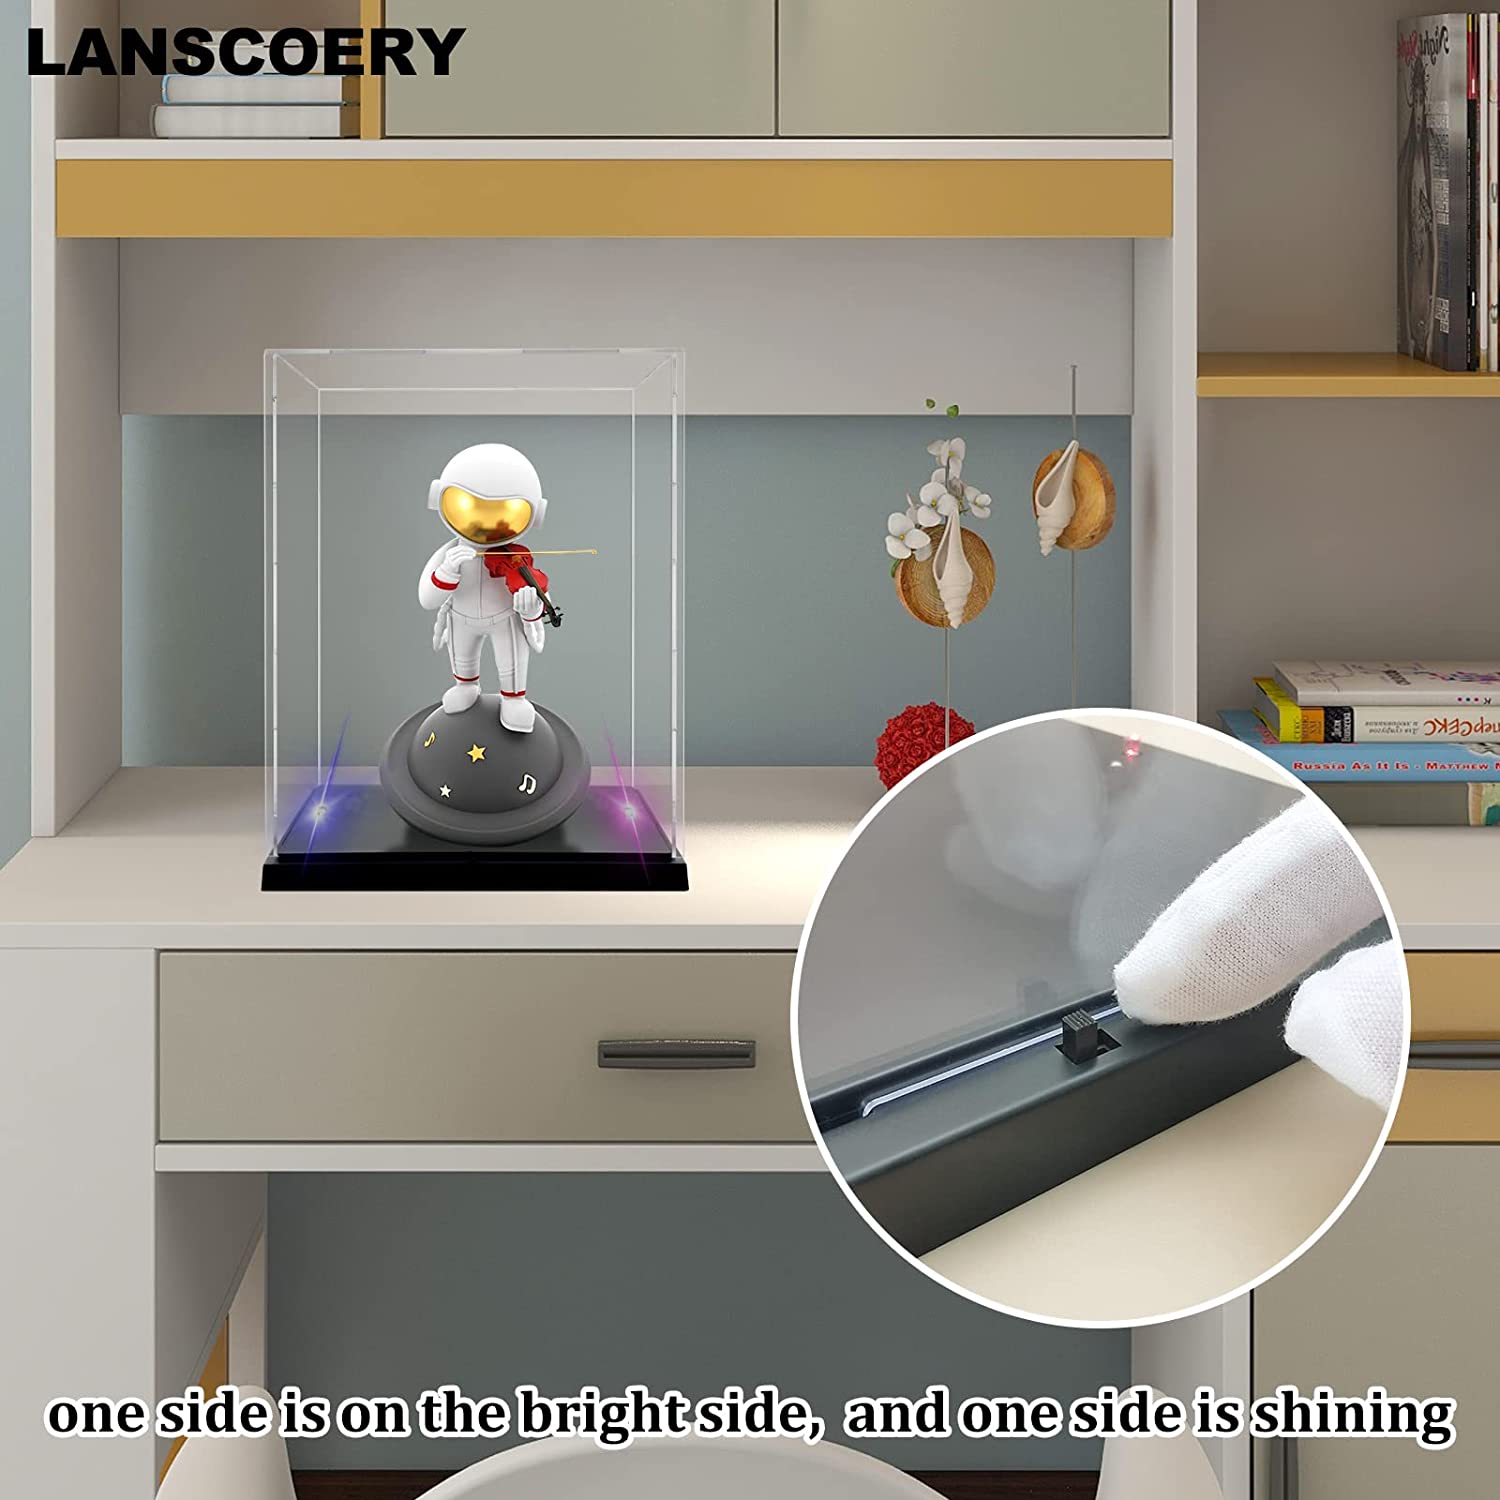 4. LANSCOERY Lighted Assemble Display Box Case